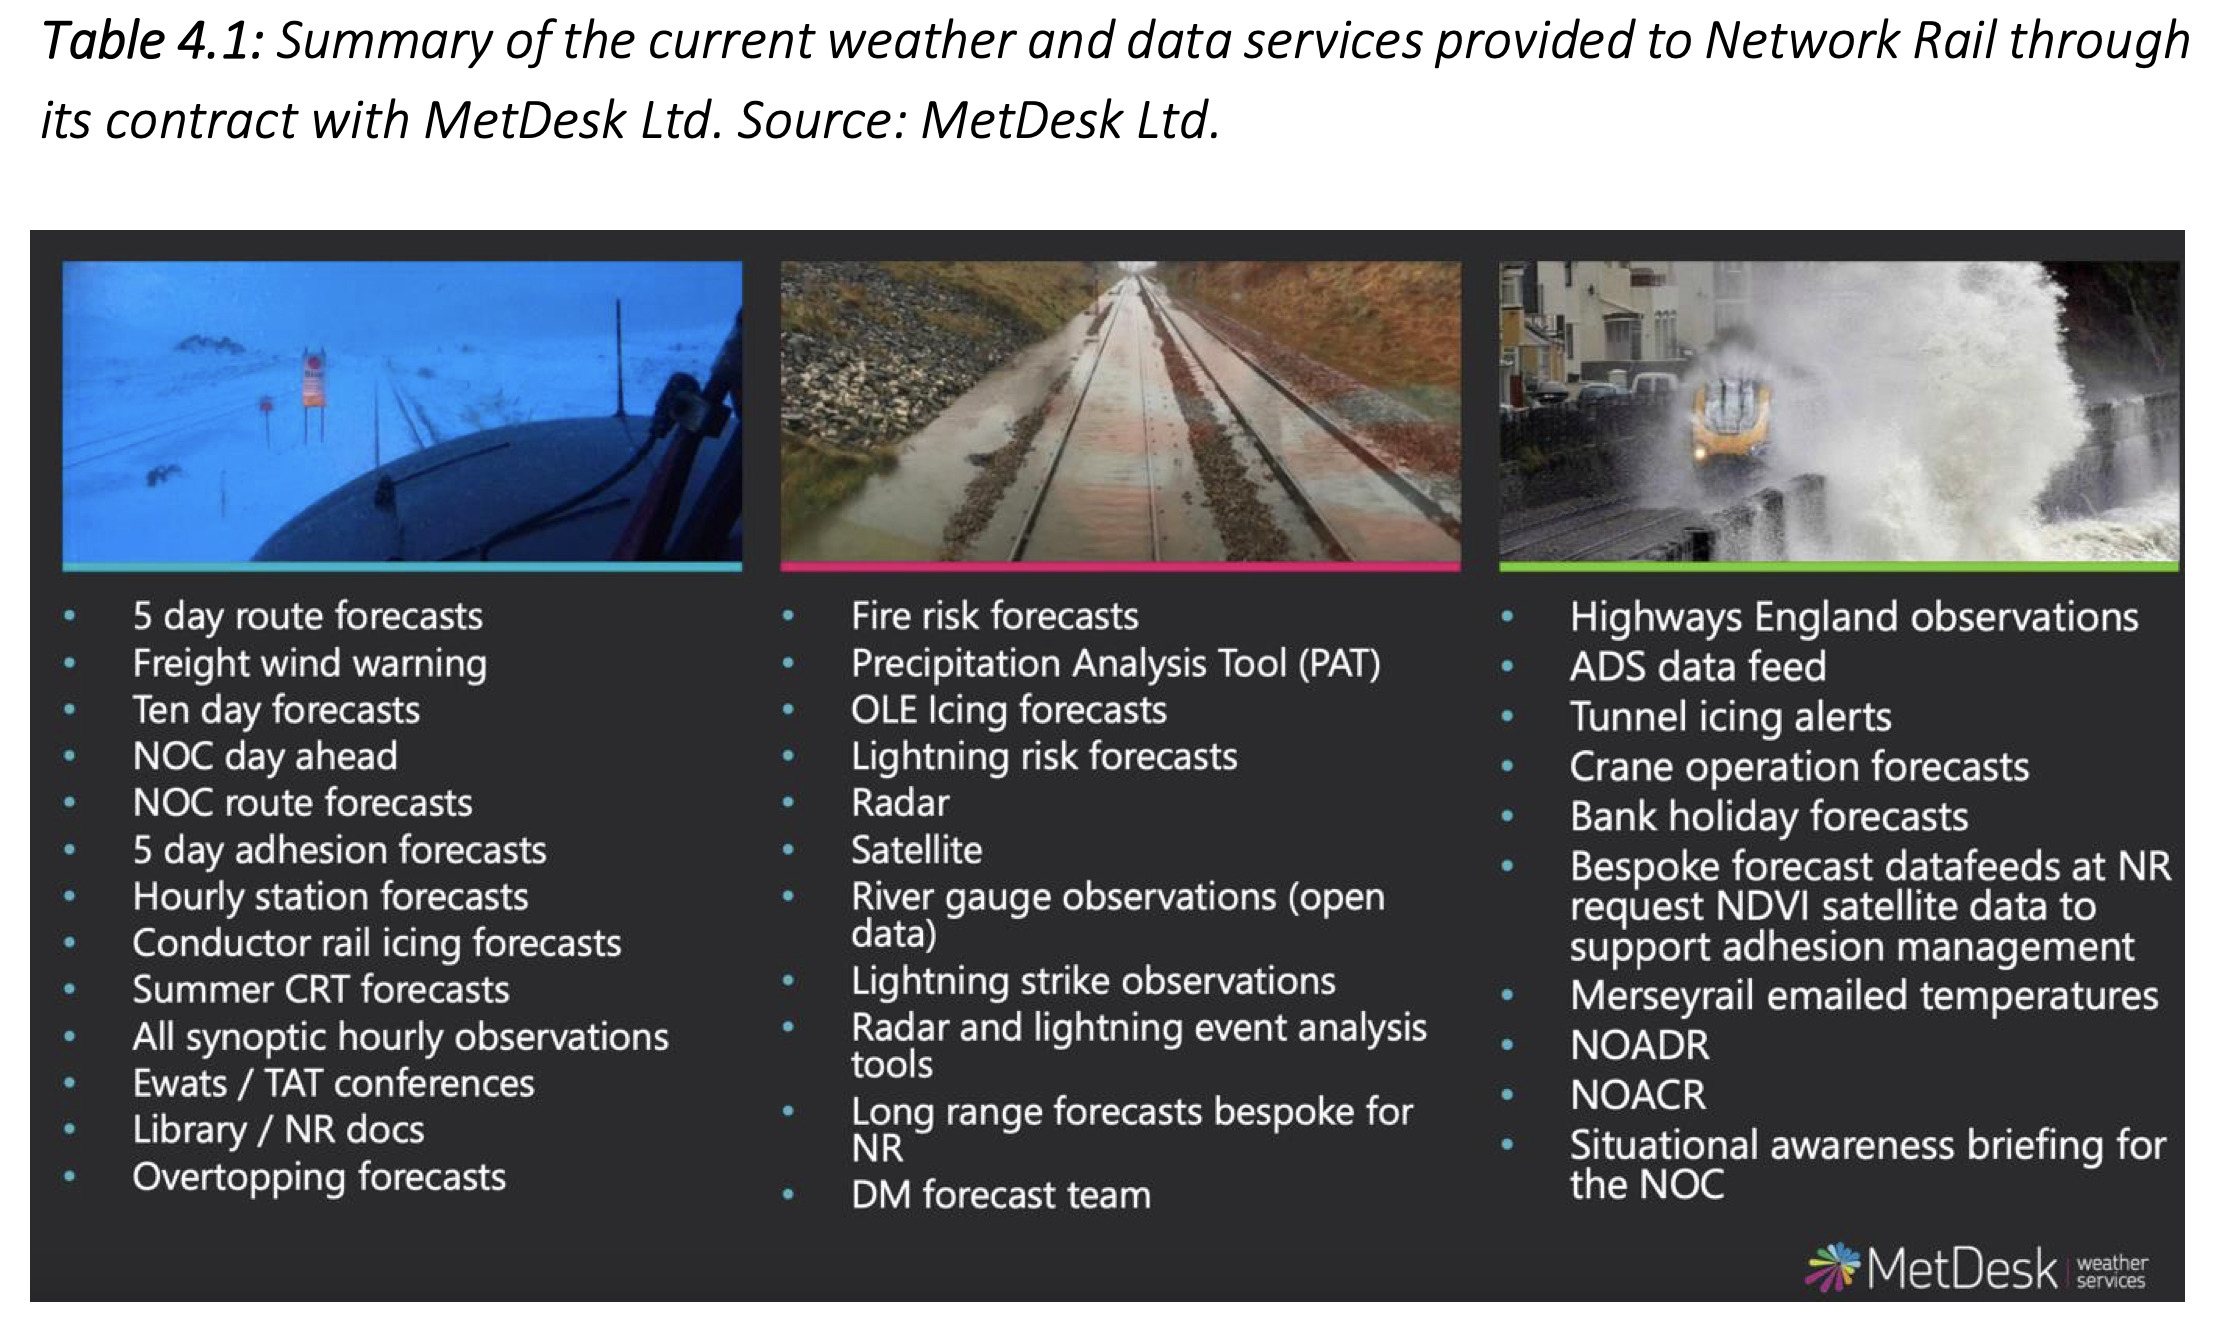 Data provided by MetDesk (Source: Network Rail)